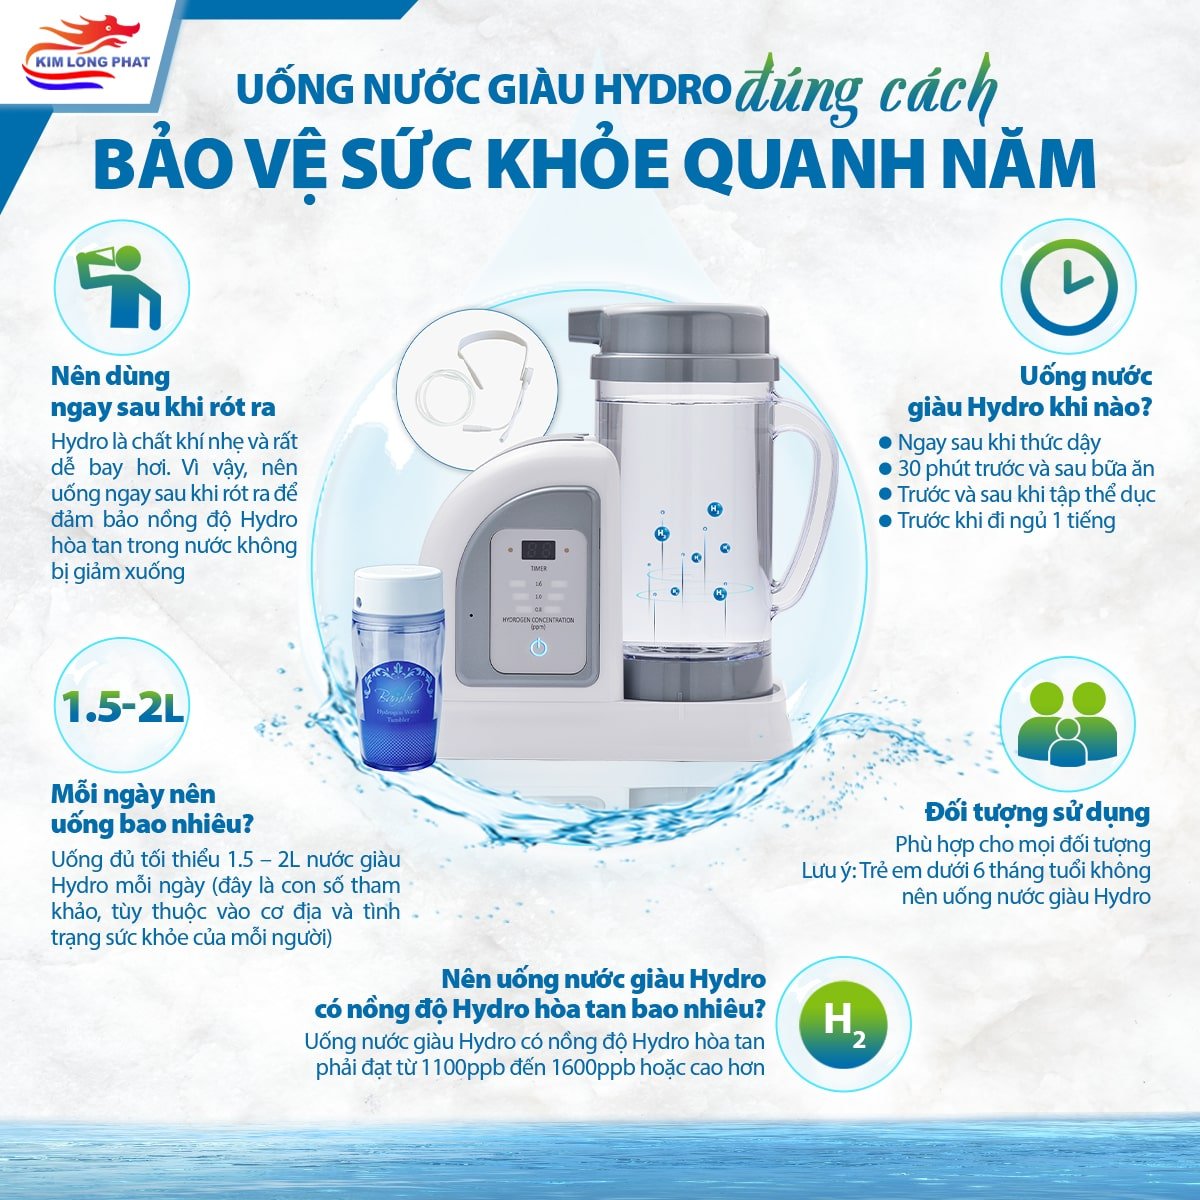 uong nuoc giau hydro dung cach min